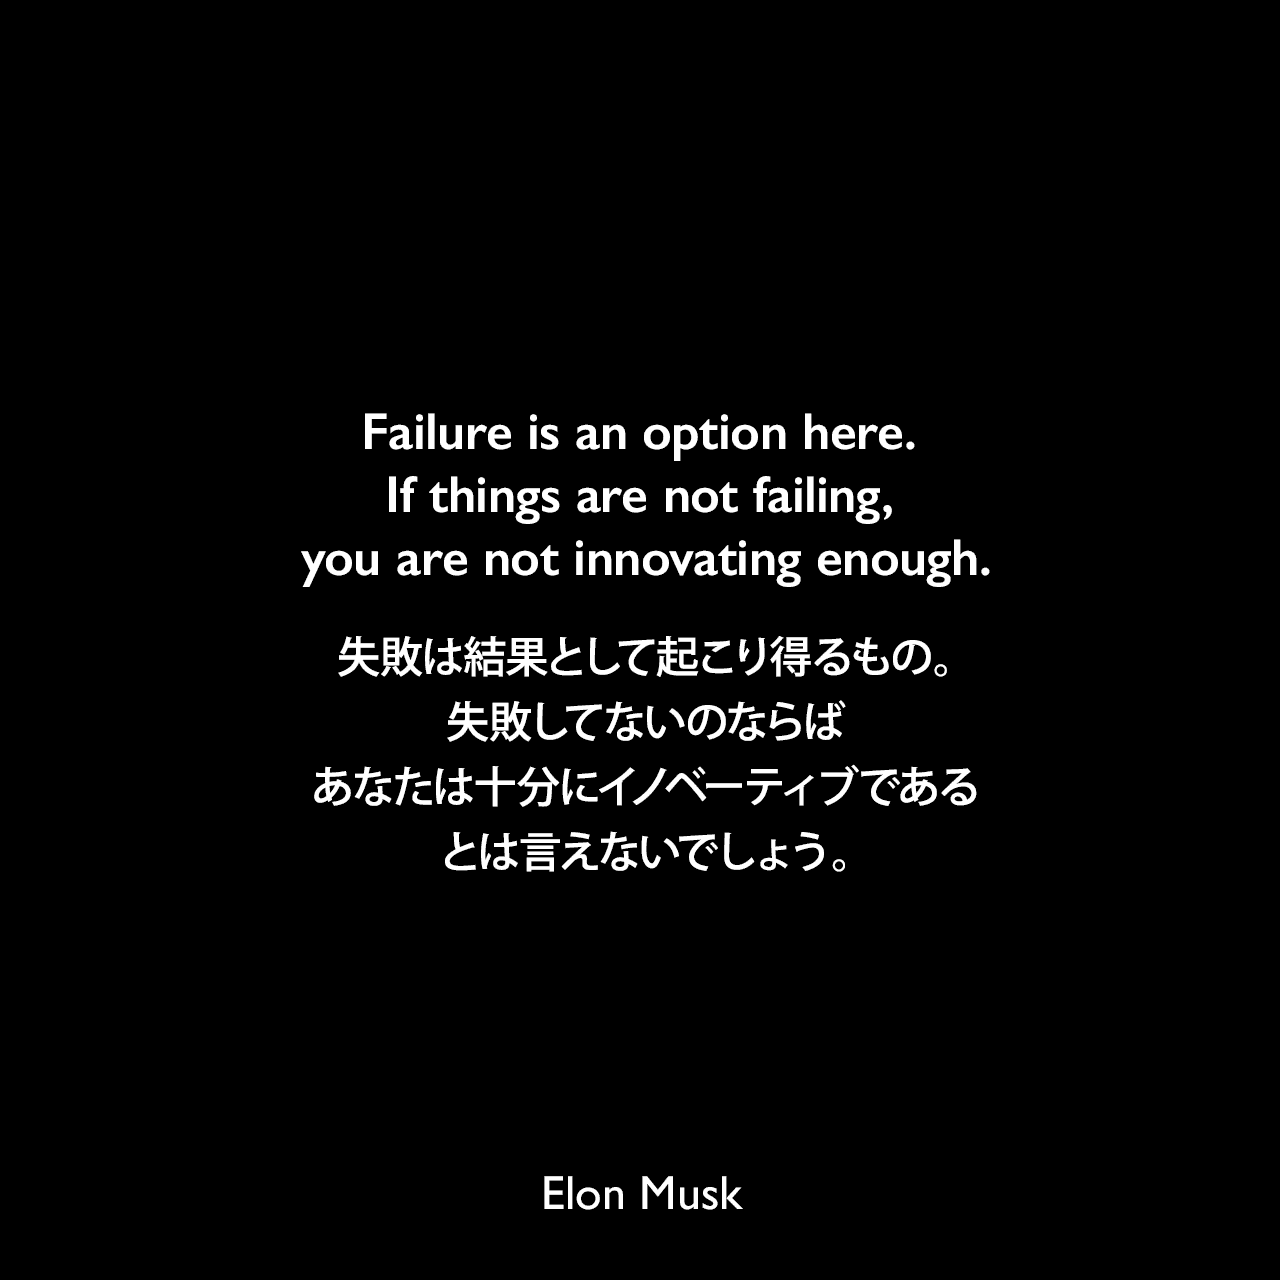 Failure is an option here. If things are not failing, you are not innovating enough.失敗は結果として起こり得るもの。失敗してないのならば、あなたは十分にイノベーティブであるとは言えないでしょう。- 2005年2月 Fast Company「Hondas in Space」よりElon Musk